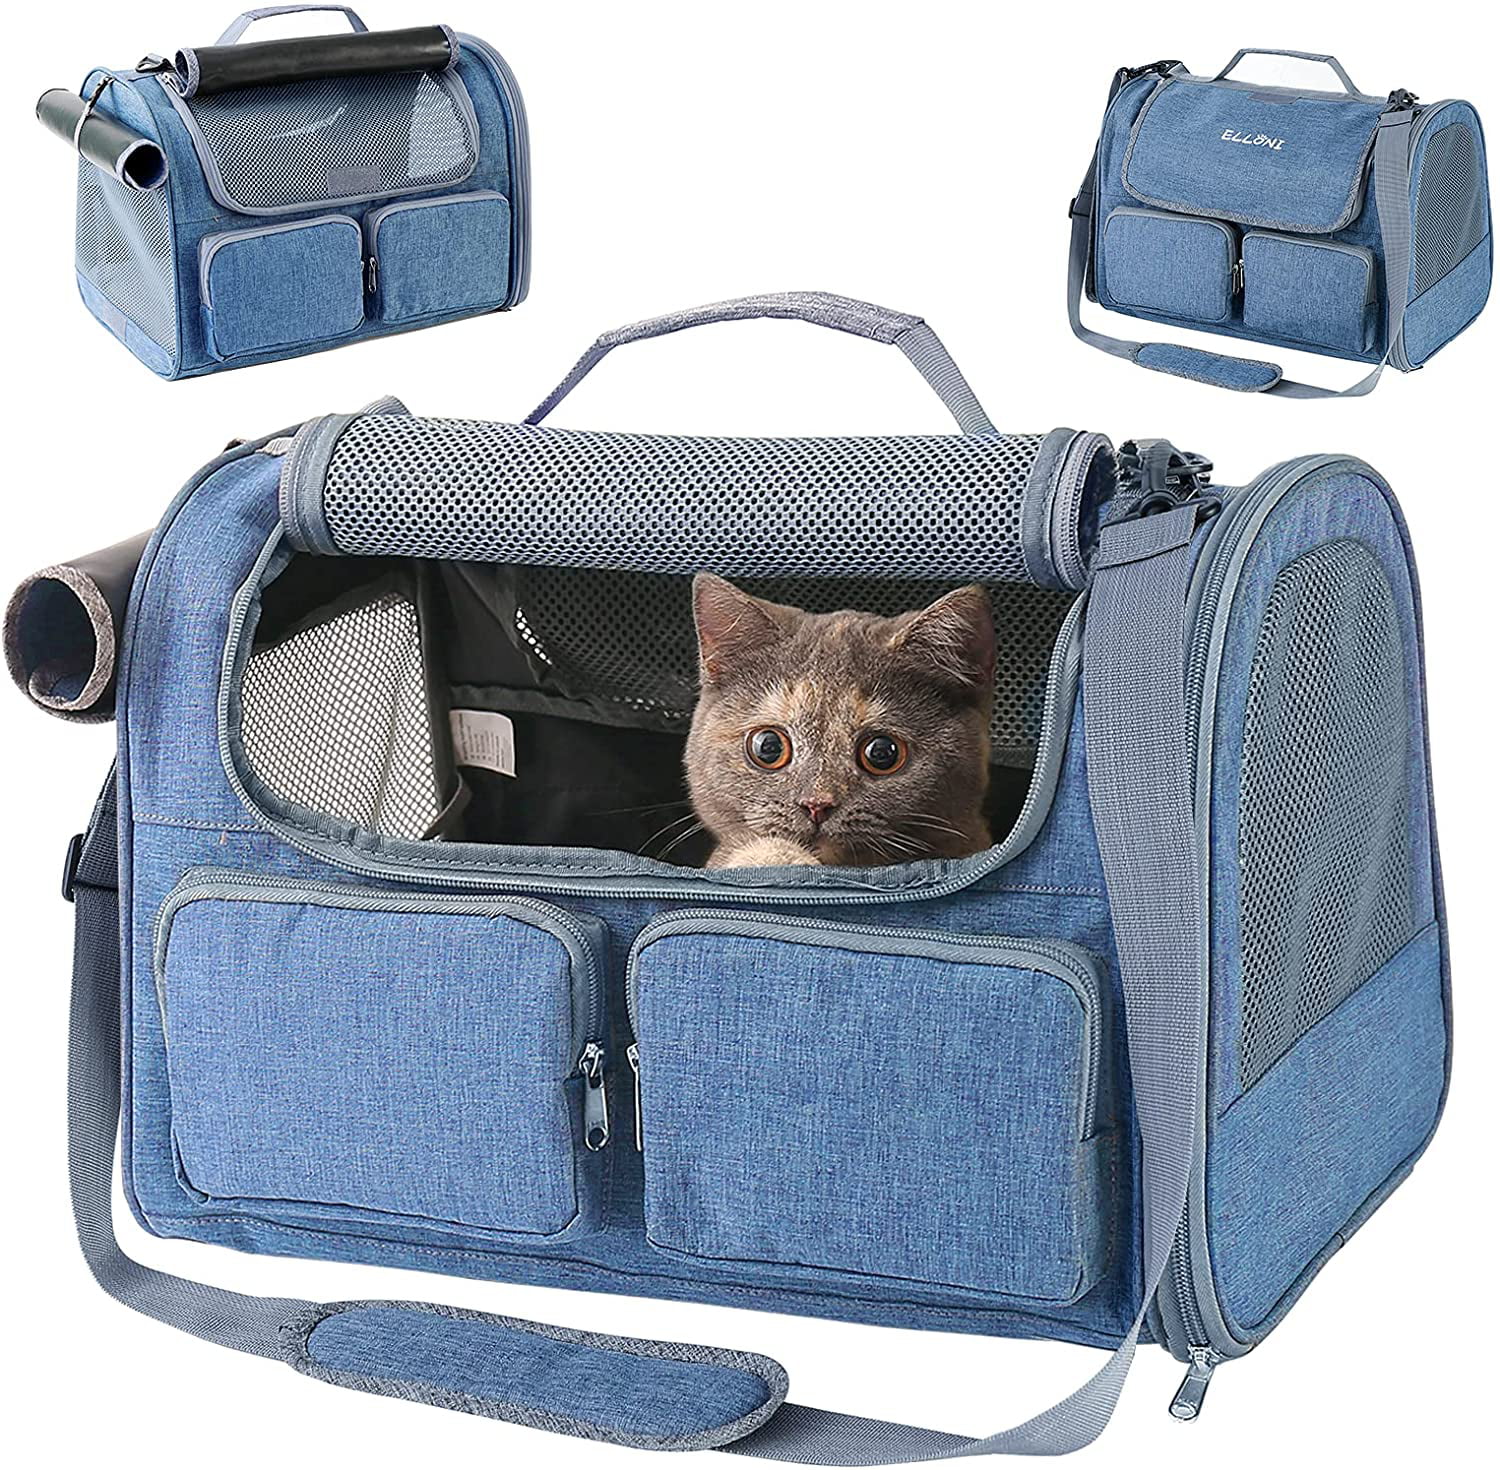 PetLike Airline Approved Pet Carrier Soft Sided Collapsible Travel Bag for Cats & Small Dogs 